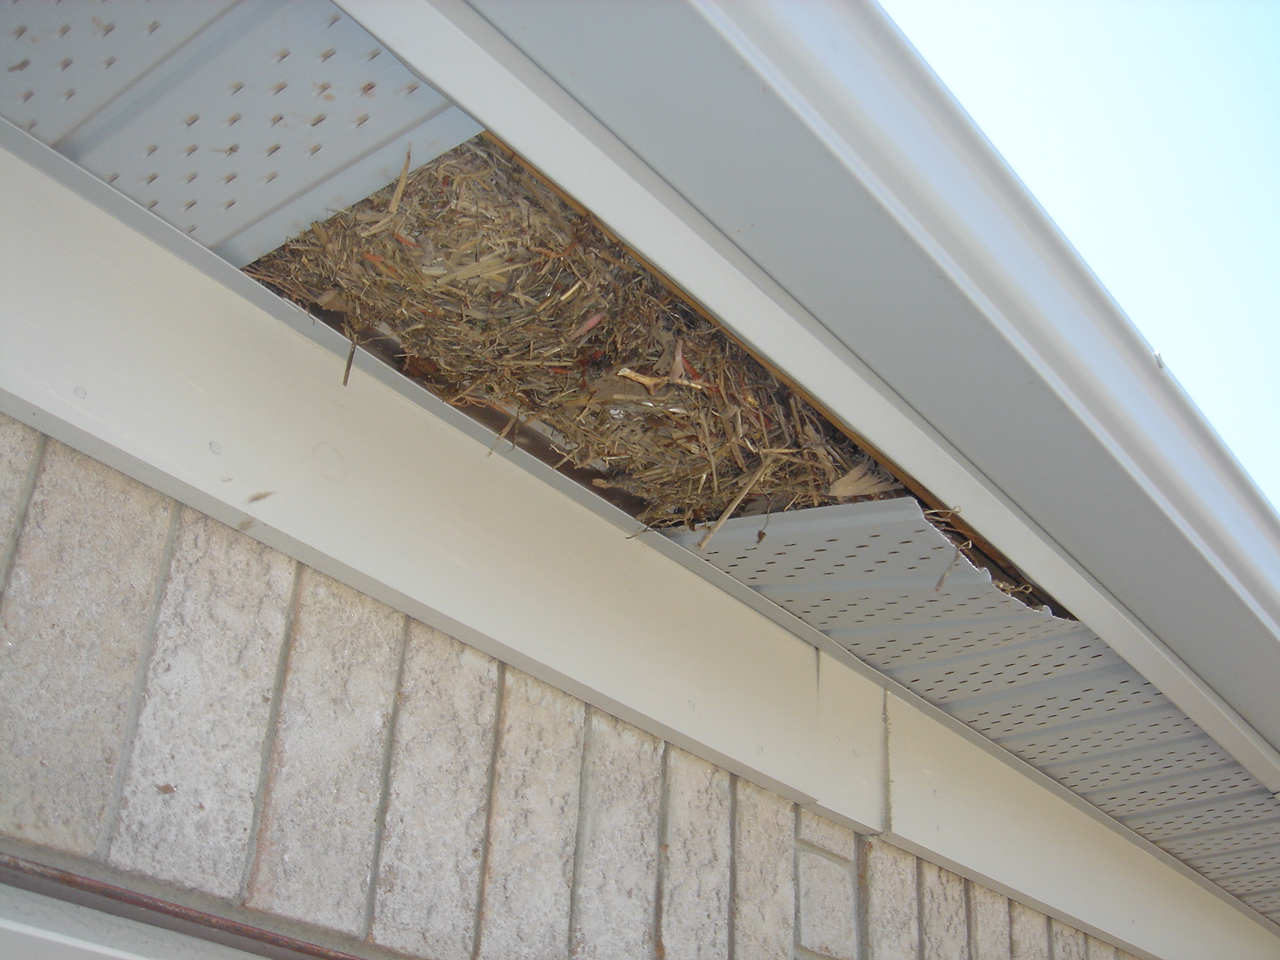 How To Remove Birds Nests From The Roof